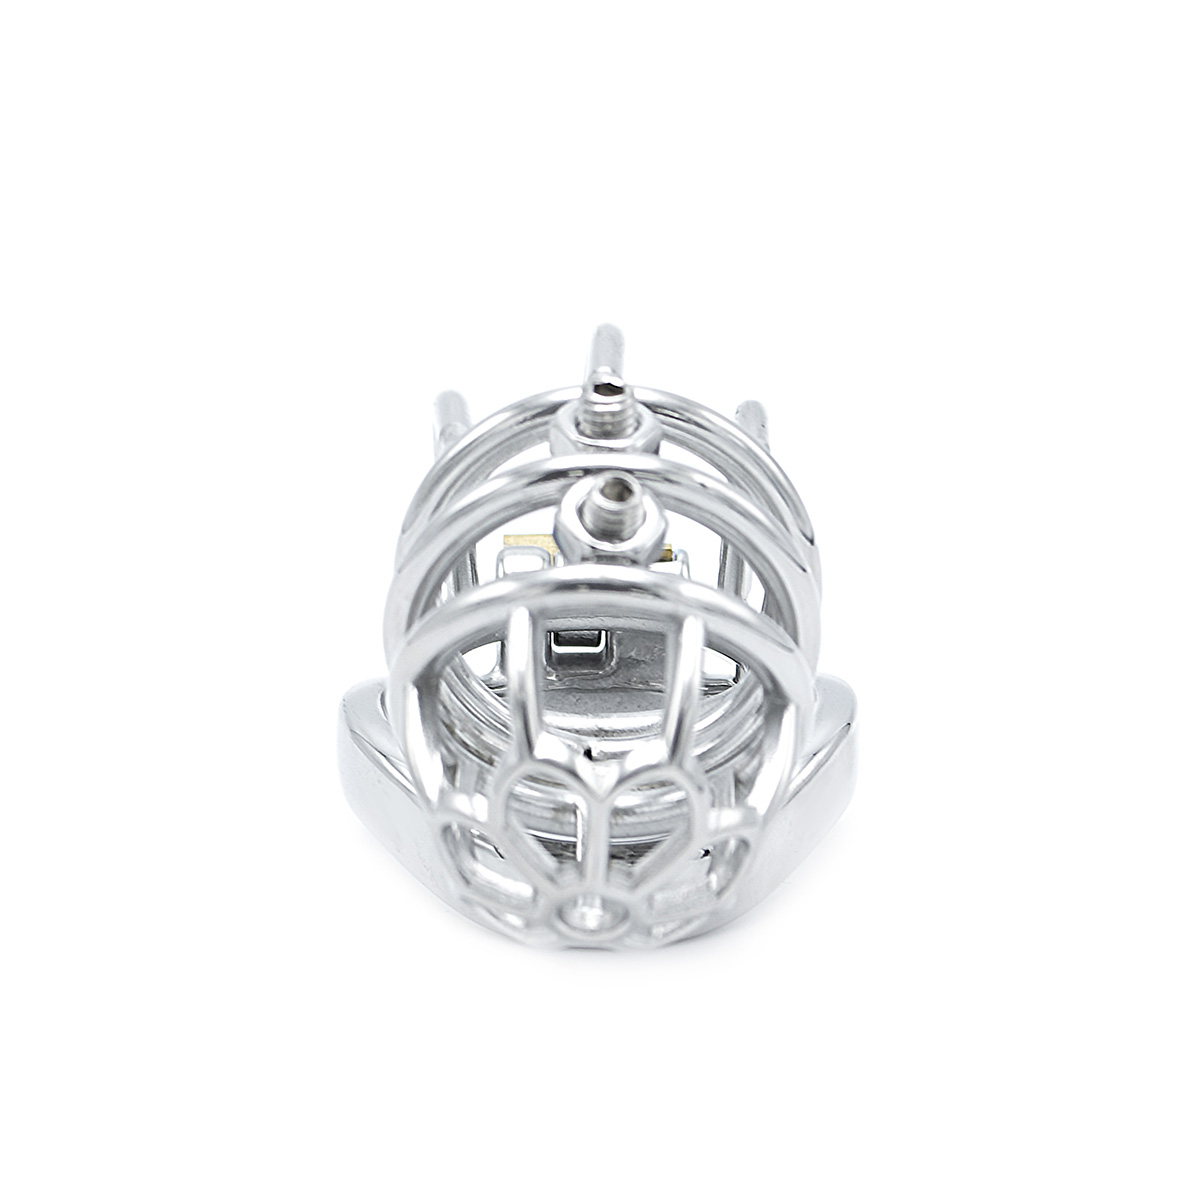 Cruve-Torture-Chastity-Device-OPR-278008-1